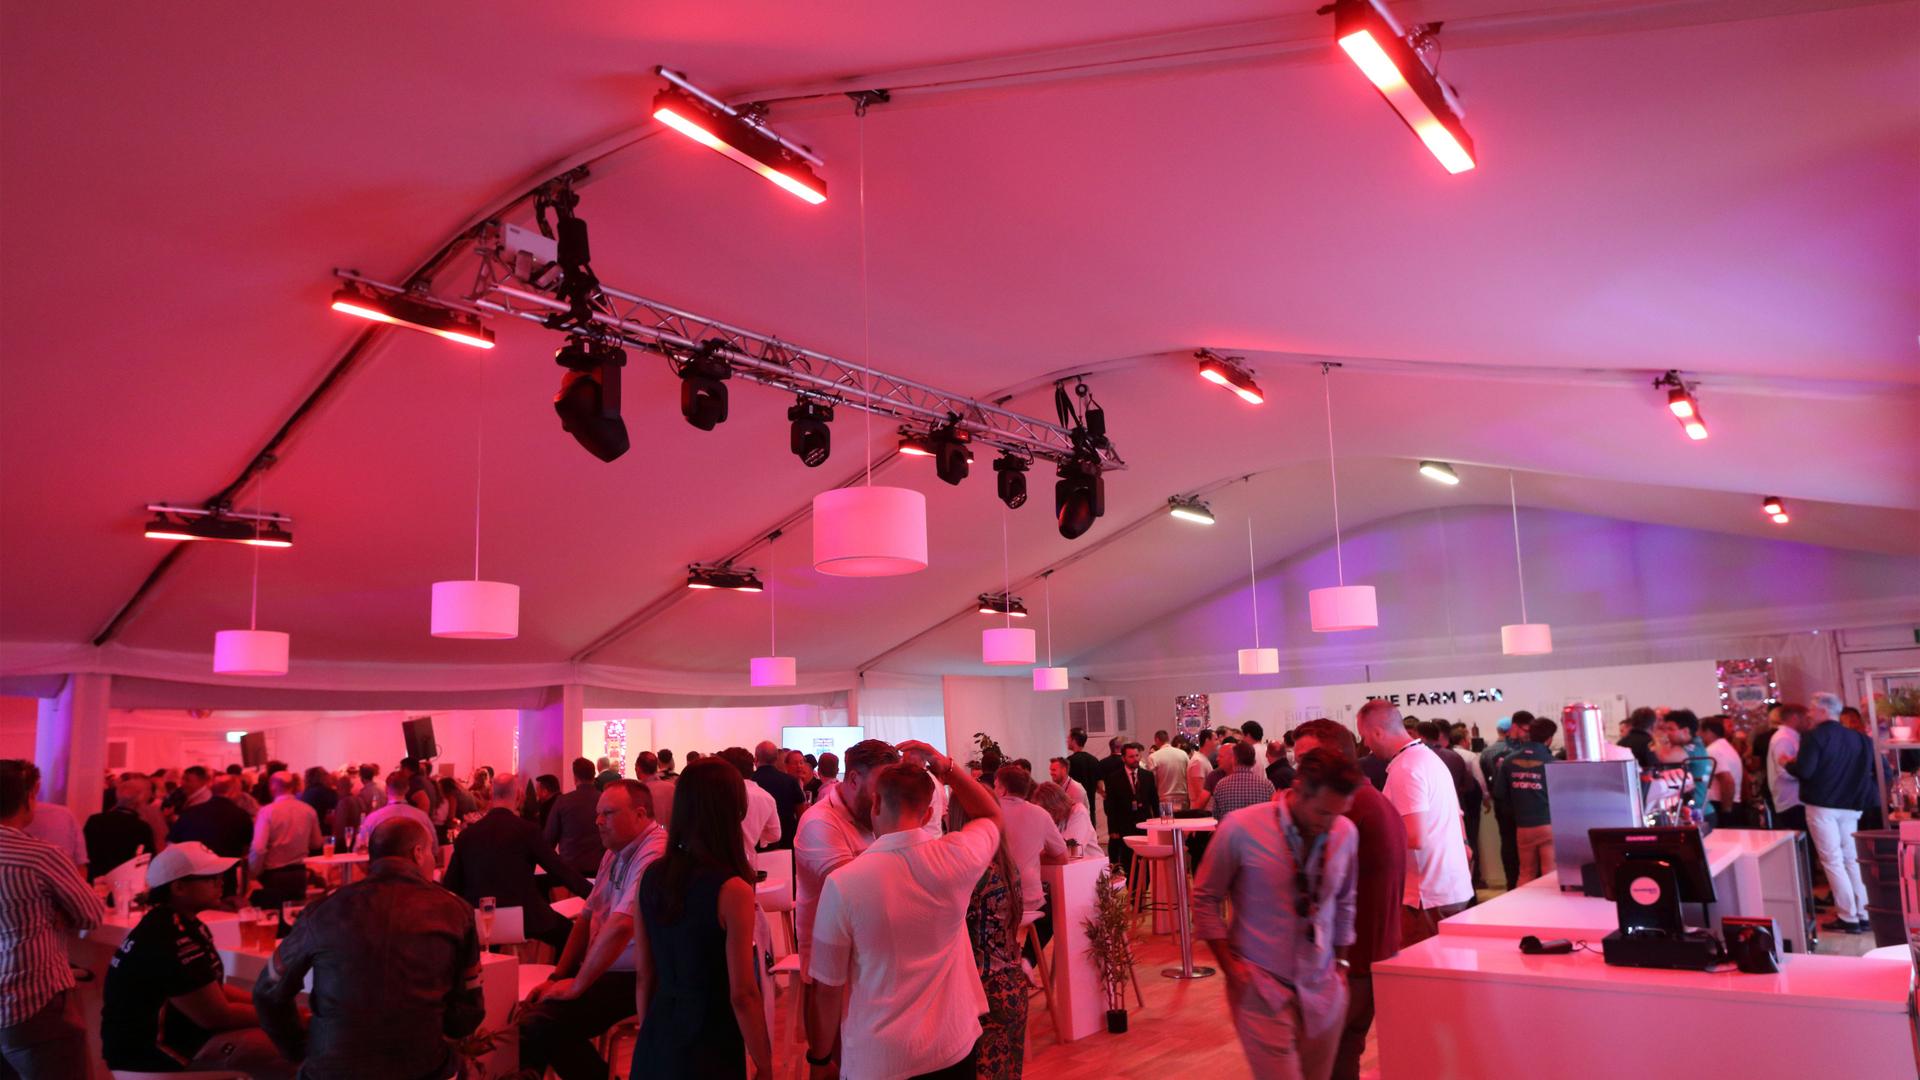 PROLIGHTS light up the British Drivers Club at Silverstone Circuit
